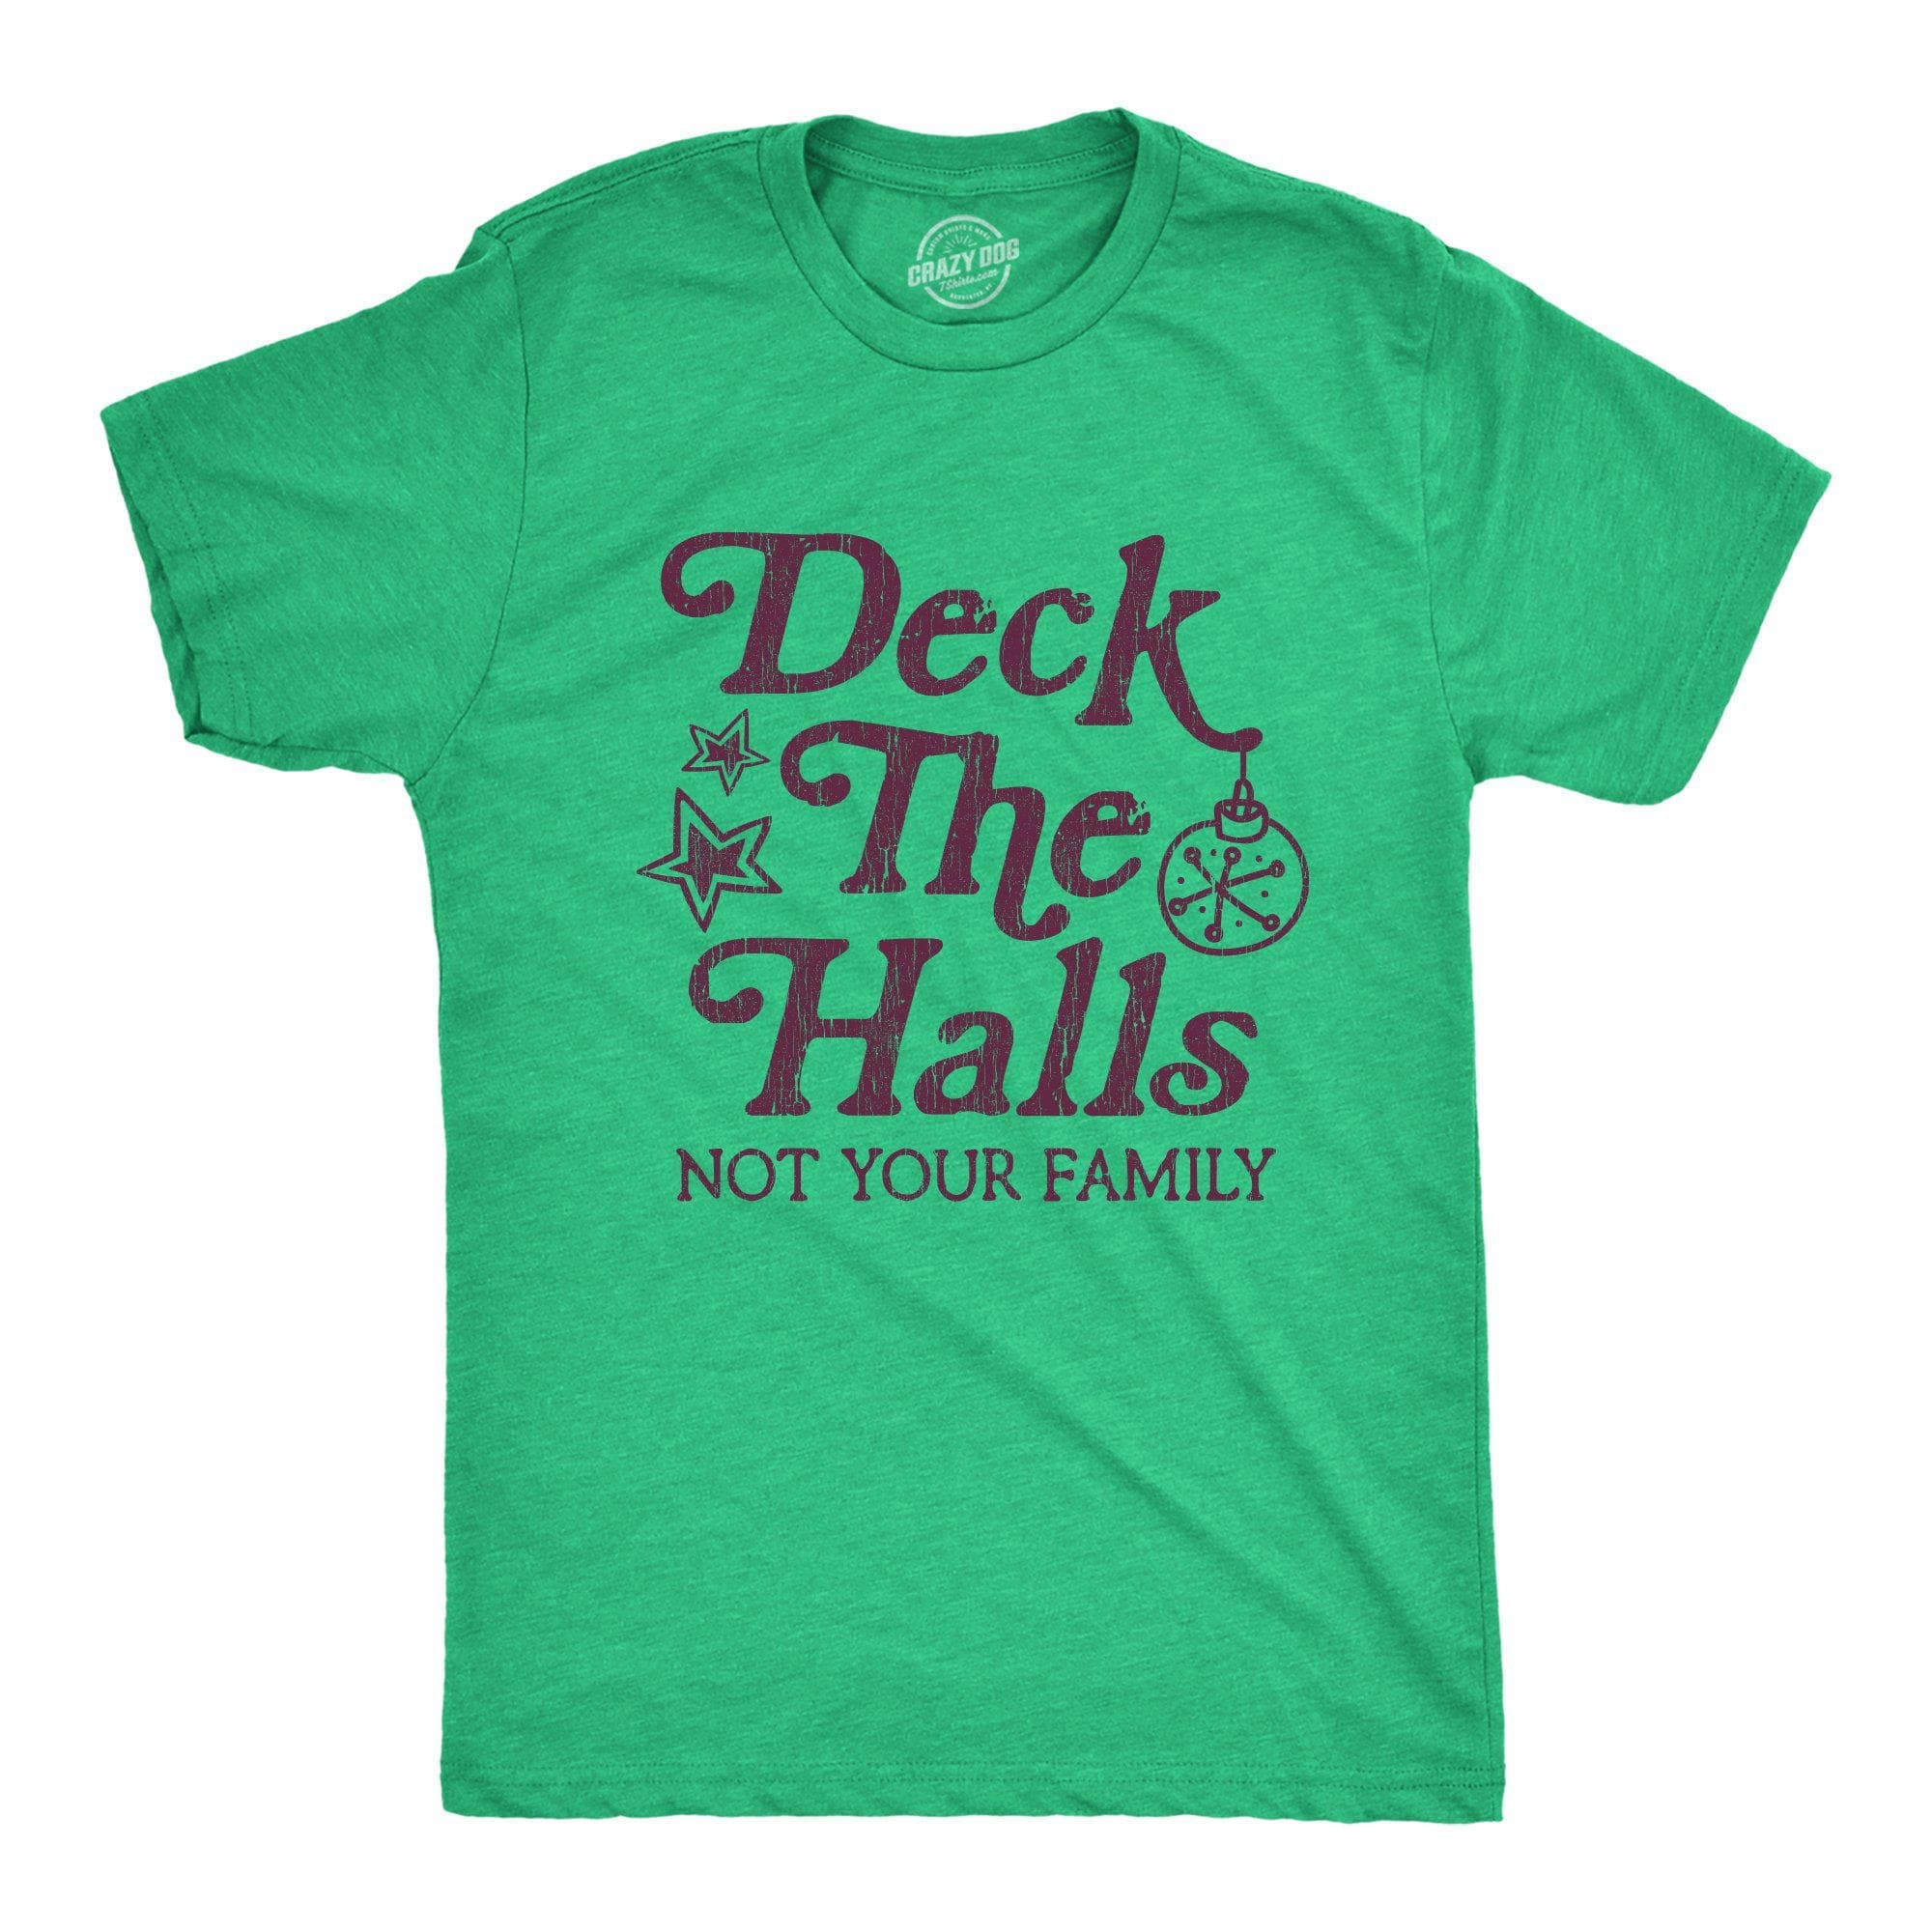 Deck The Halls Not Your Family Men's Tshirt - Crazy Dog T-Shirts